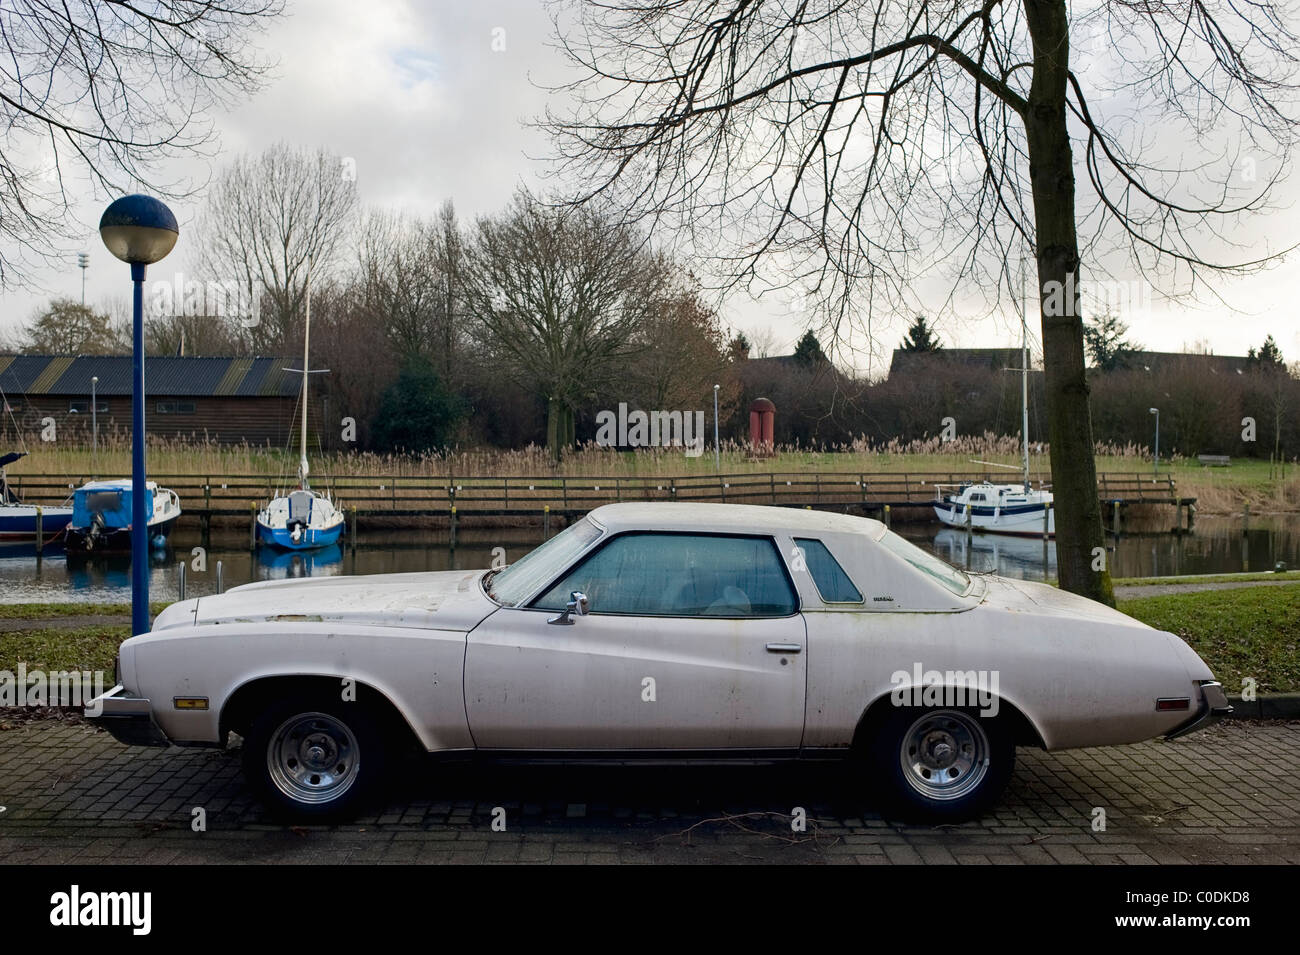 Vintage American car parked in Huizen, The Netherlands Stock Photo